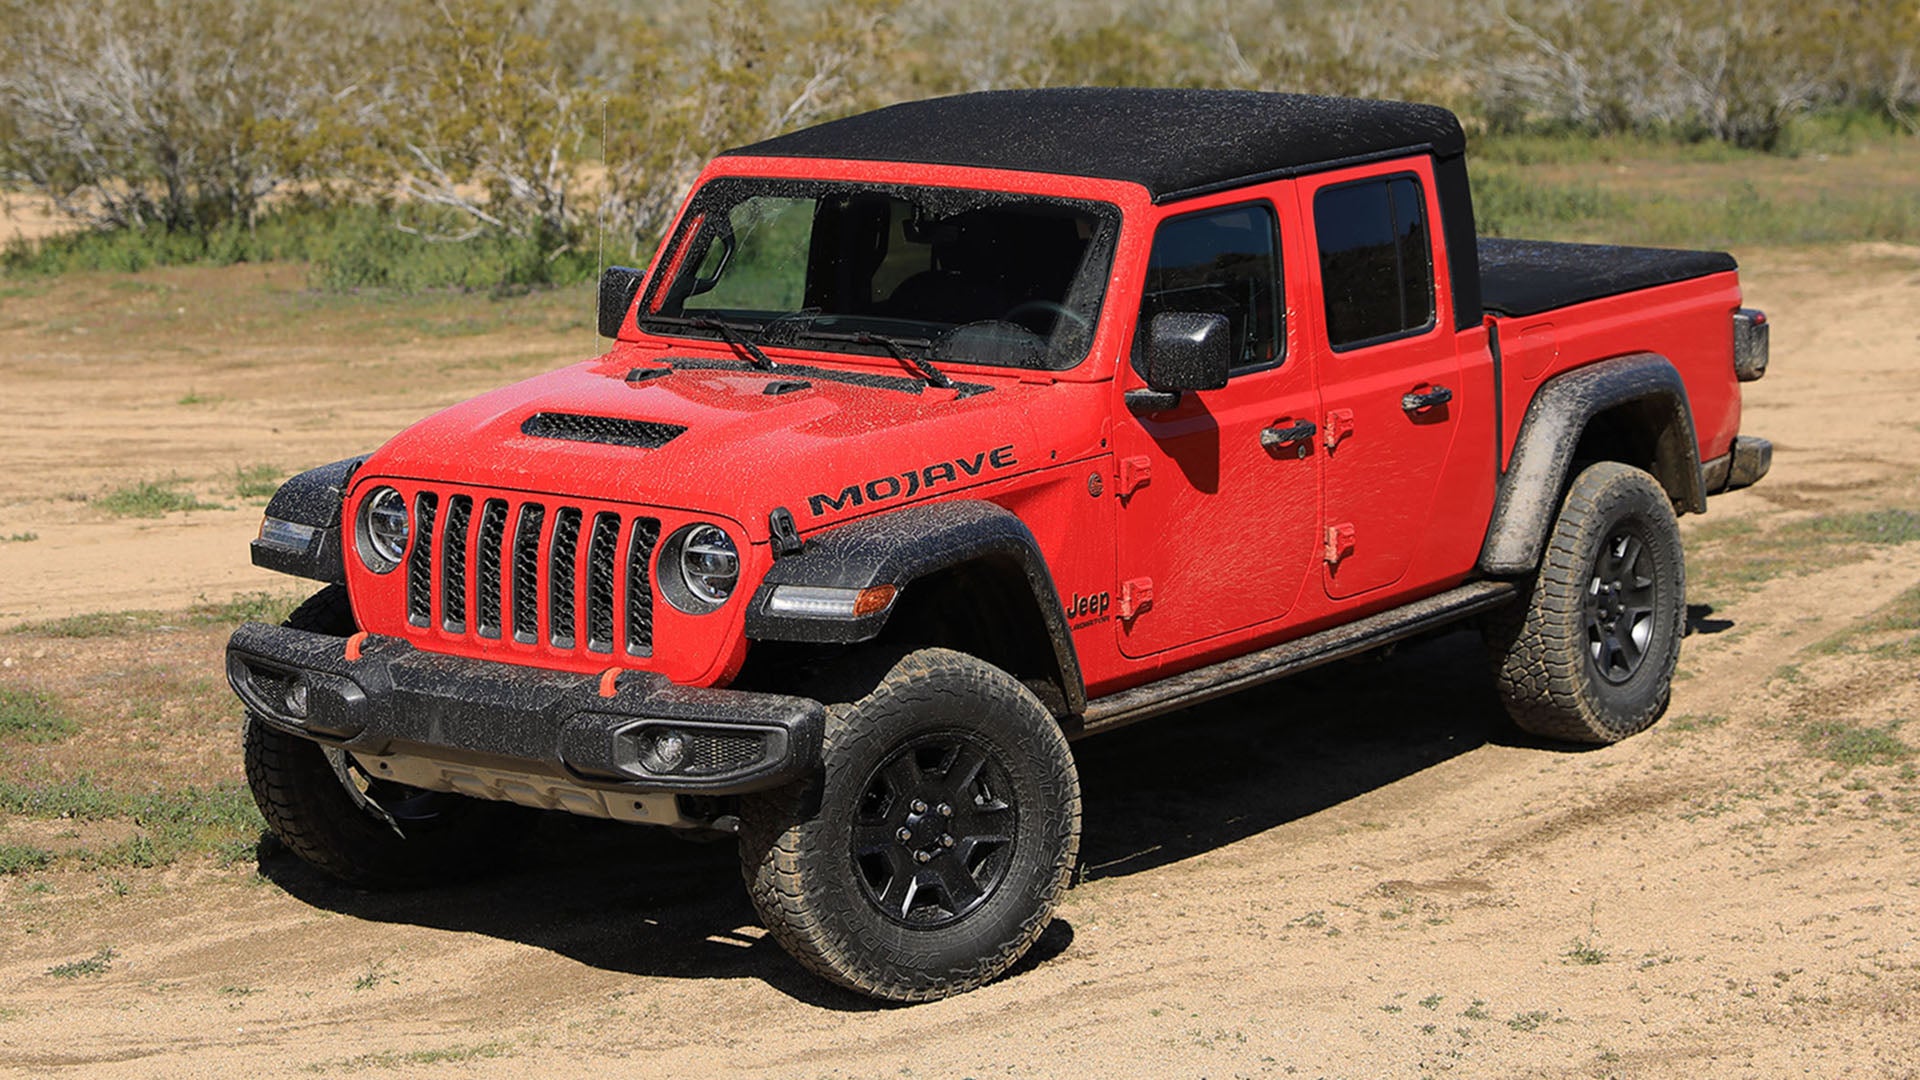 2020 Jeep Gladiator Mojave First Drive Review: The Jeep That Jumps